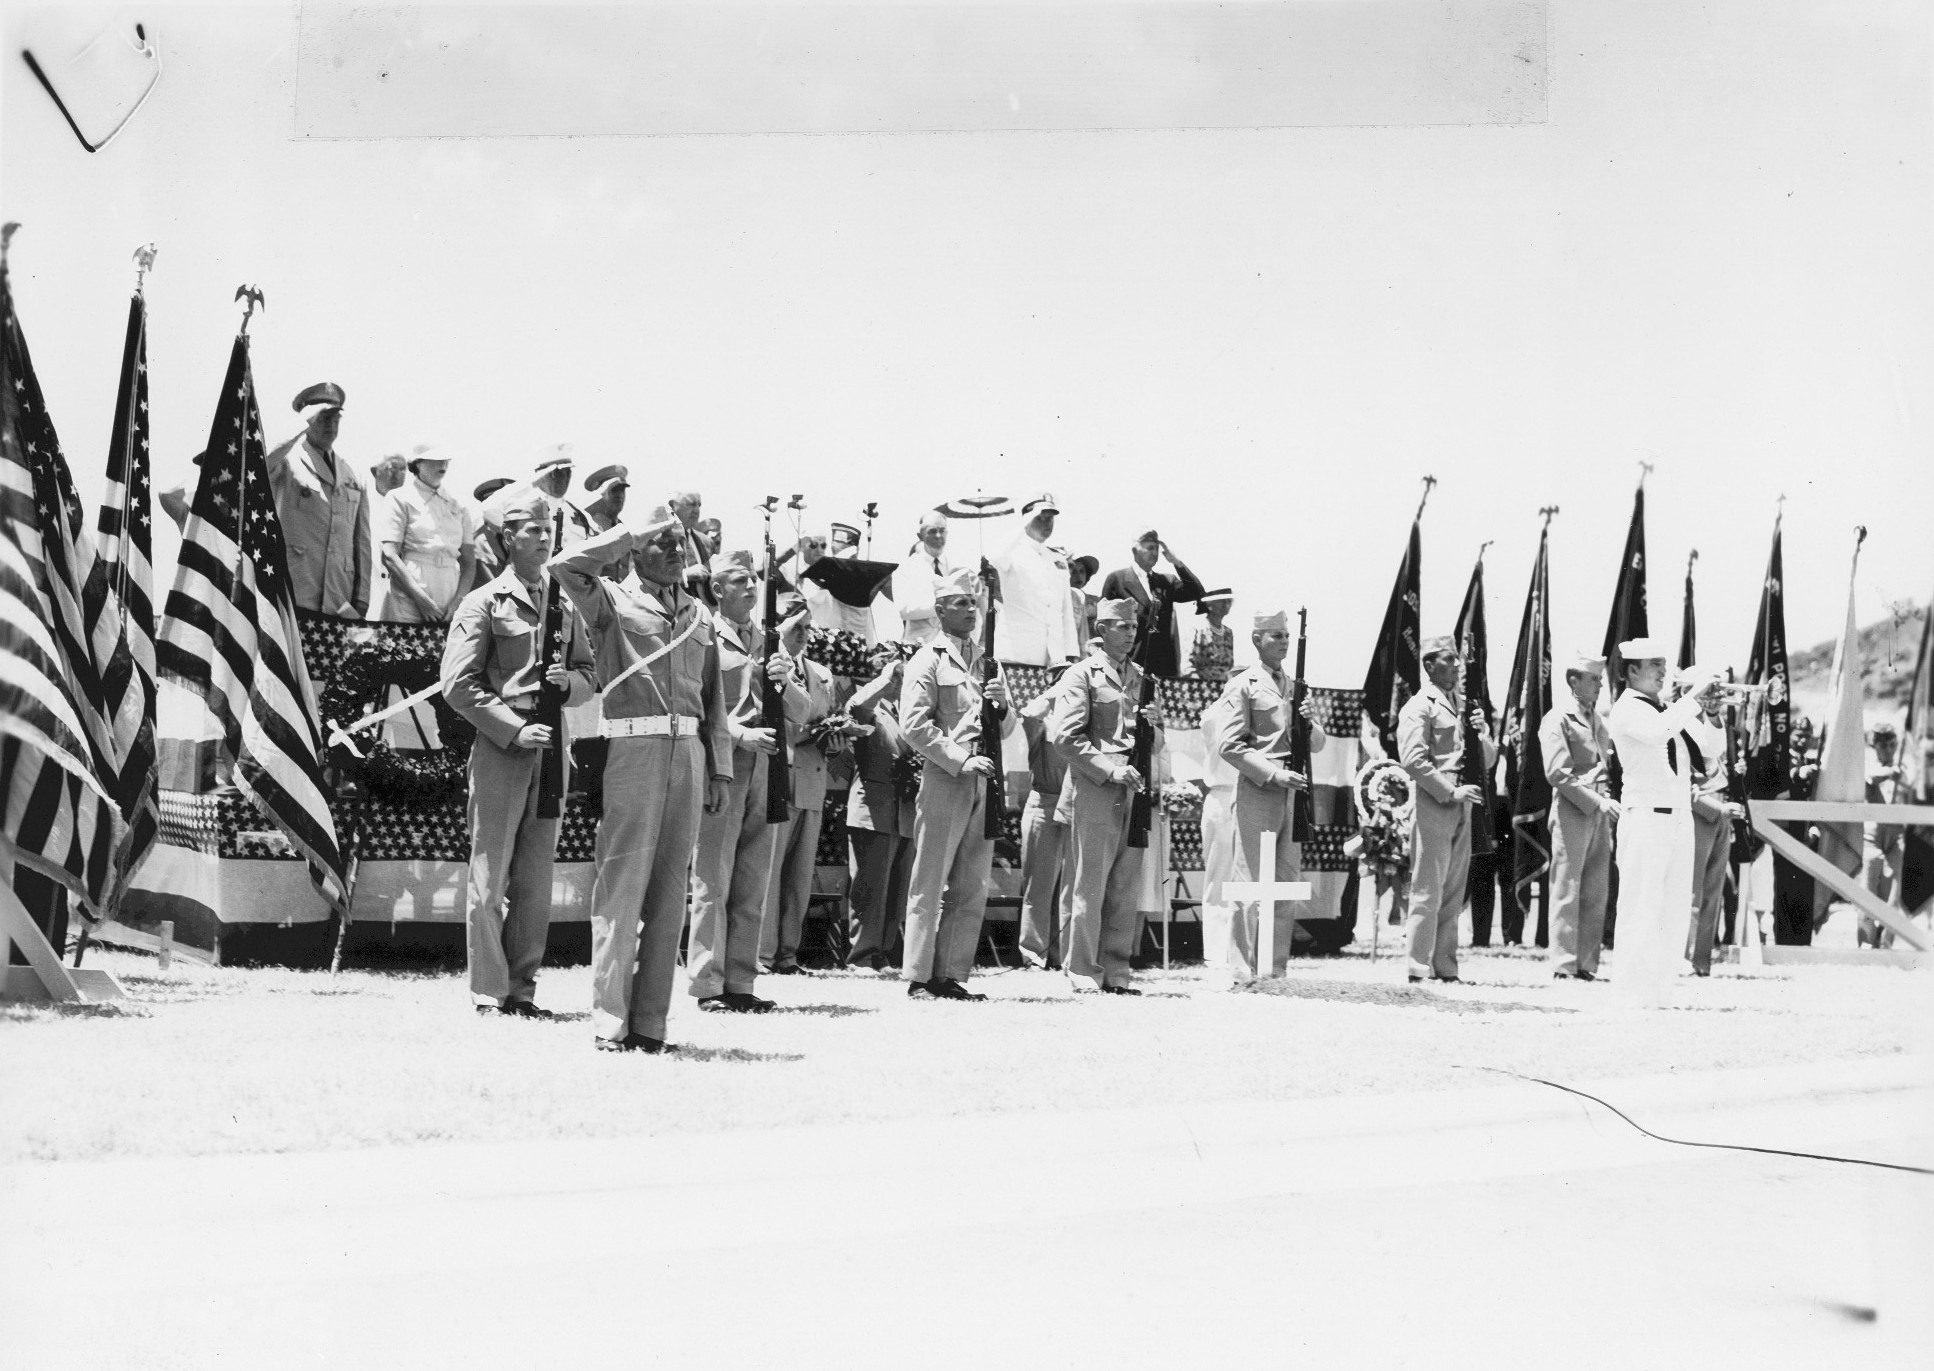 US Marines at the National Memorial Cemetery of the Pacific, Honolulu, US Territory of Hawaii, 29 May 1950